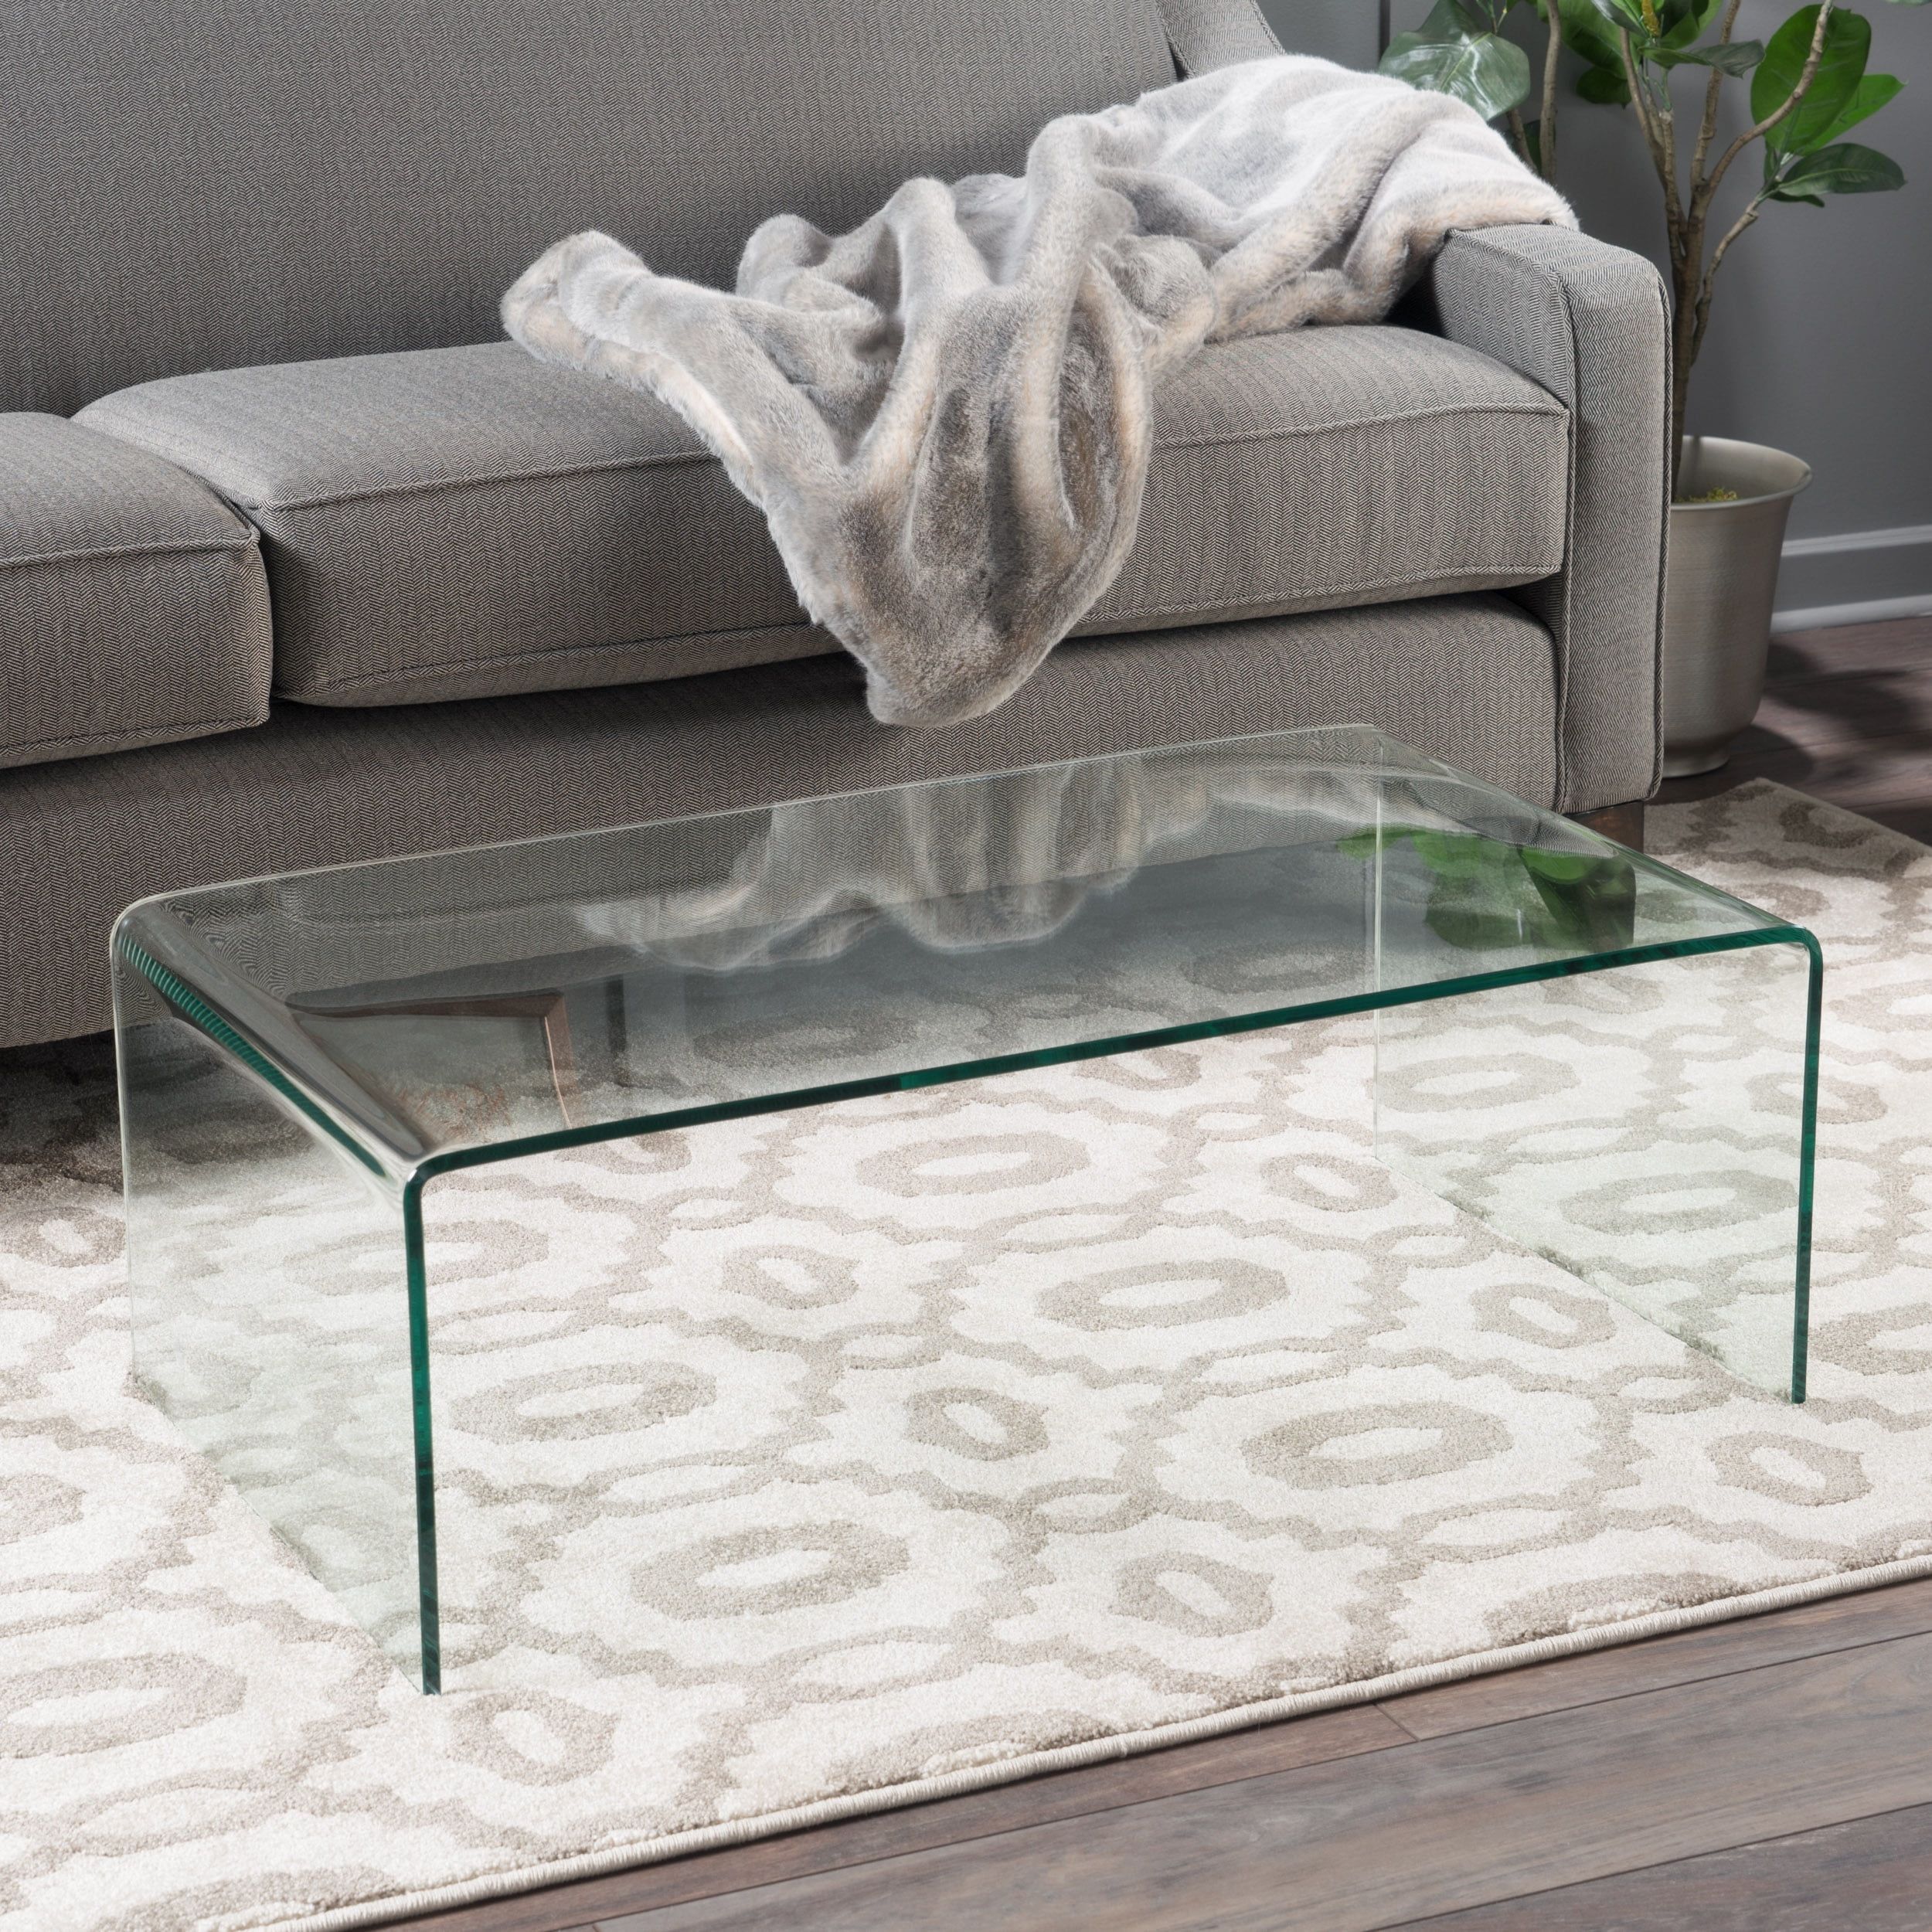 Coffee Table Tempered Glass : Reclaimed Wood & Tempered Glass Top Regarding Wood Tempered Glass Top Coffee Tables (View 20 of 20)